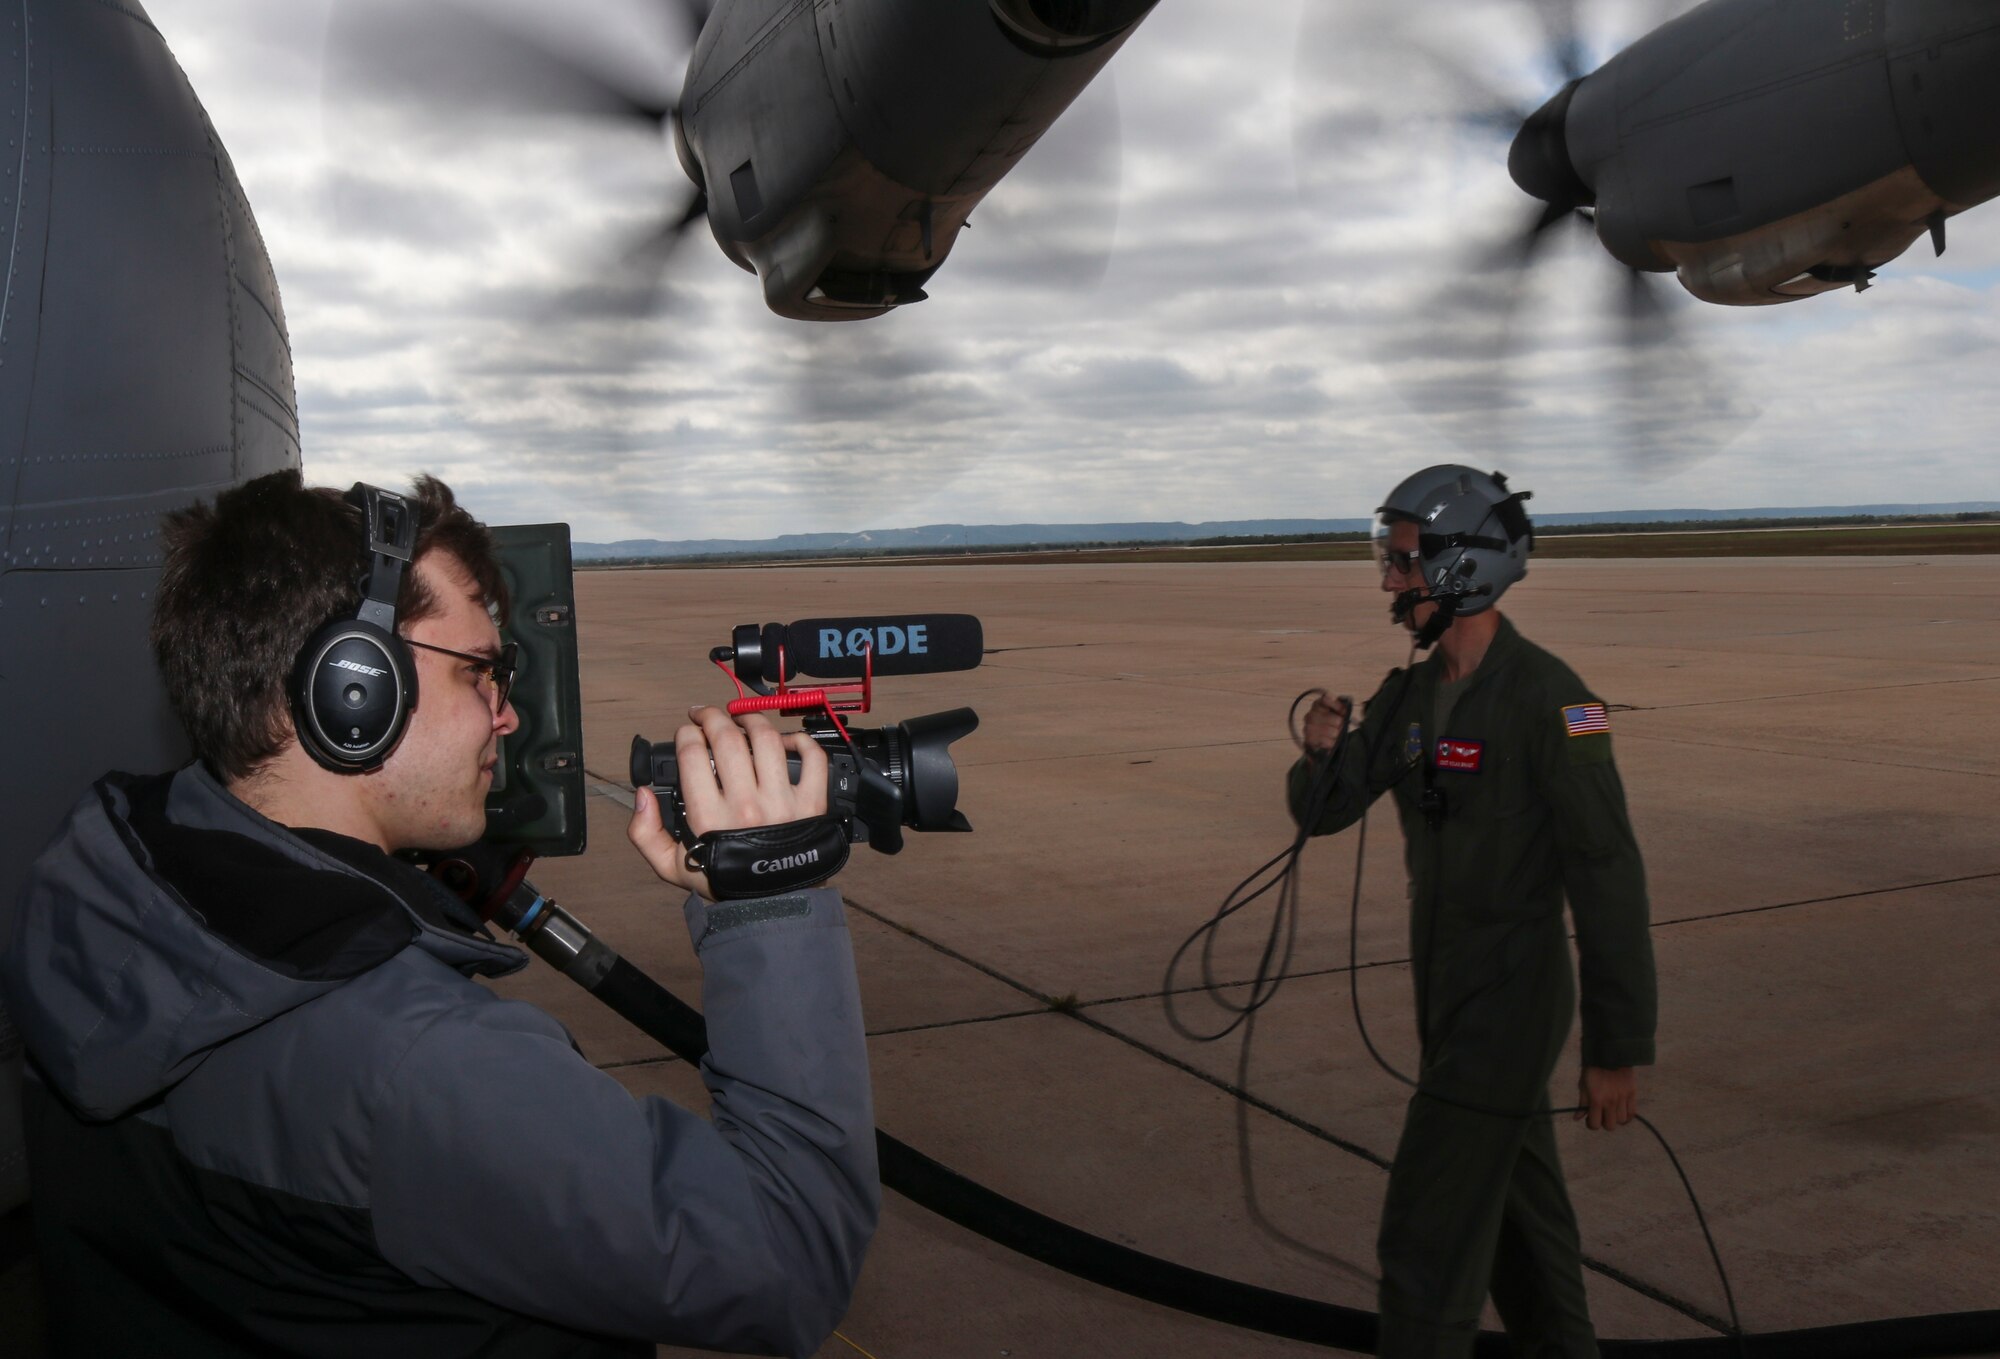 317th AW partner with VR team to create training modules